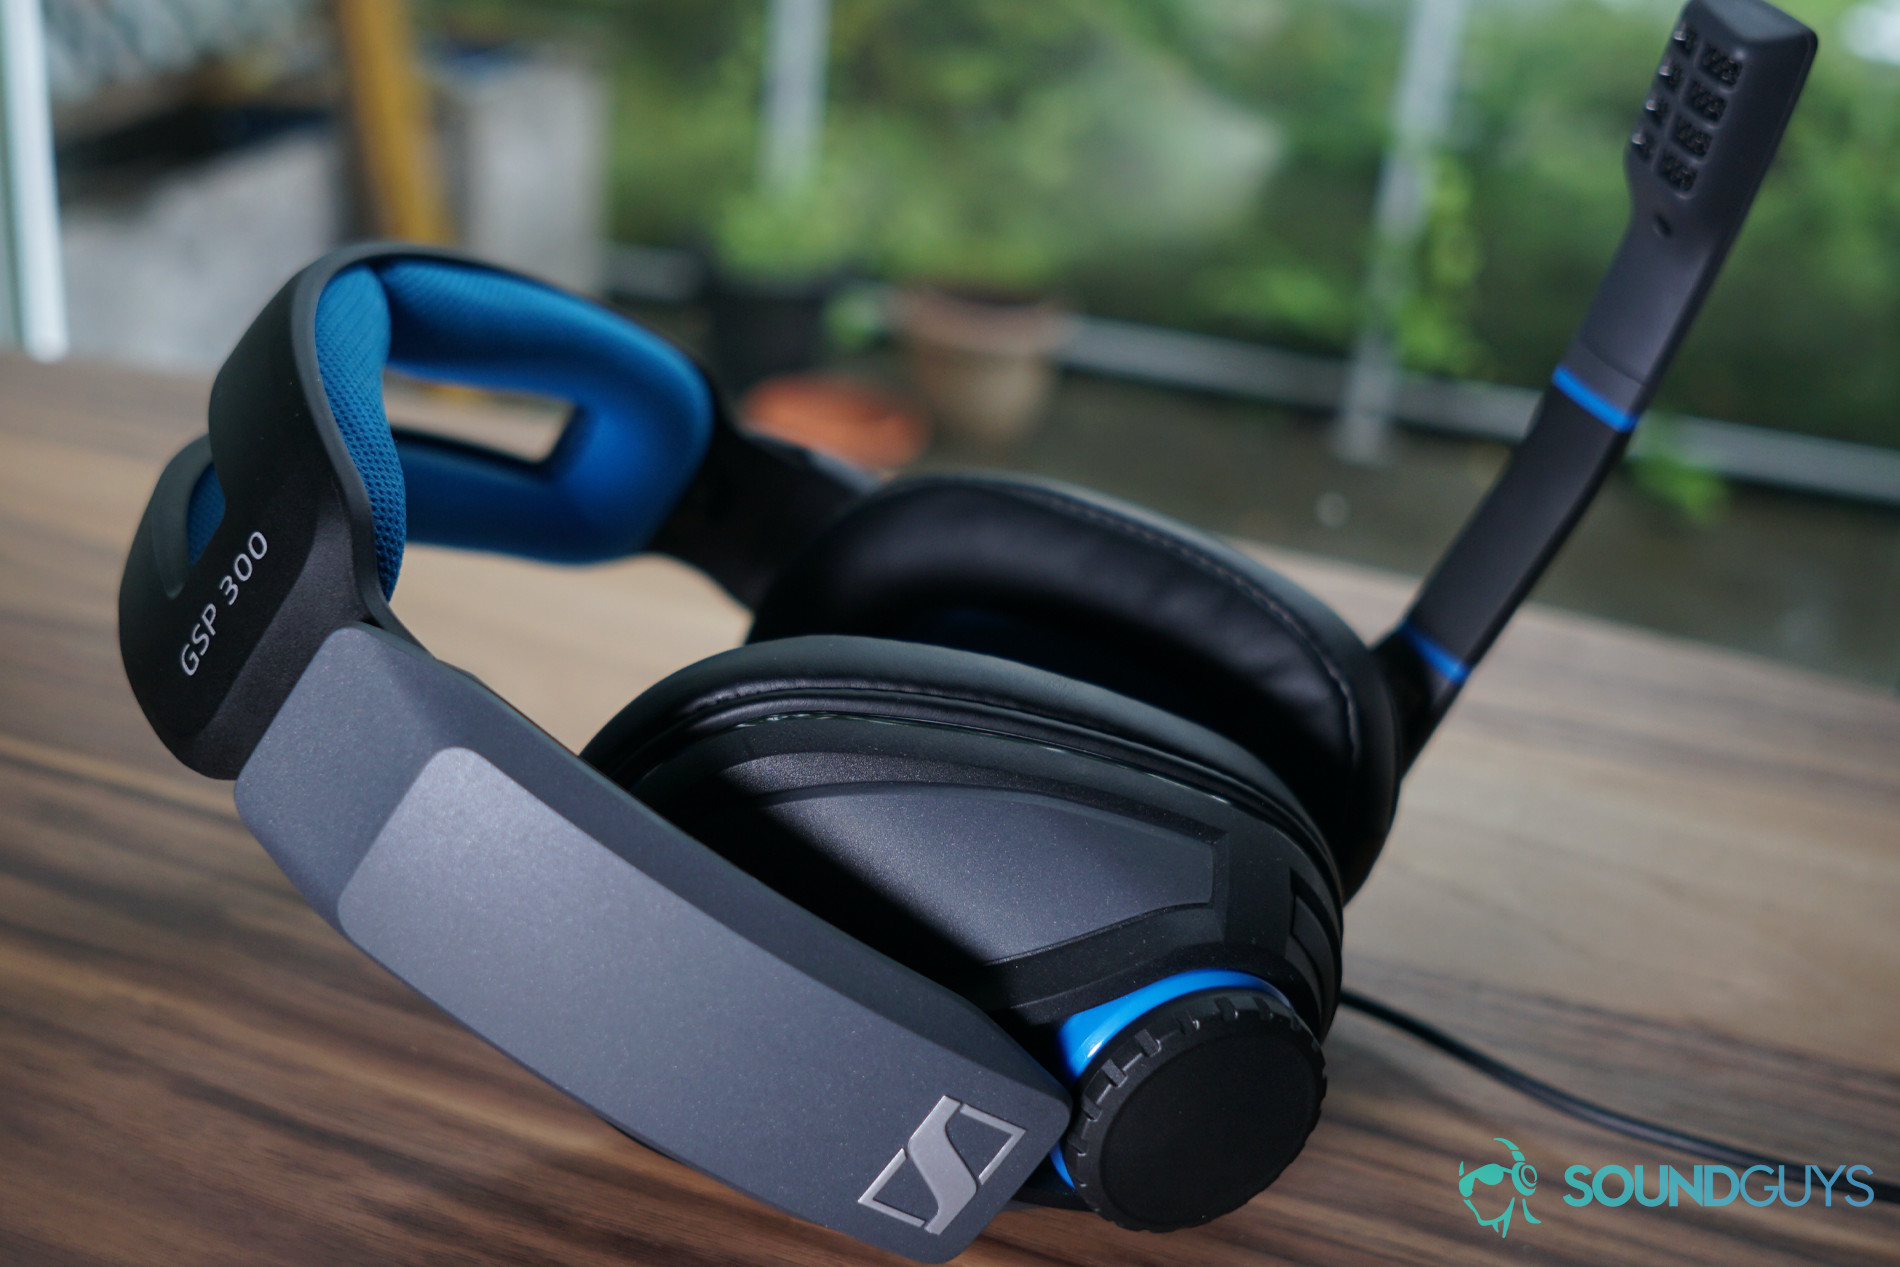 The Sennheiser GSP 300 gaming headset lays on a wooden table by a window.